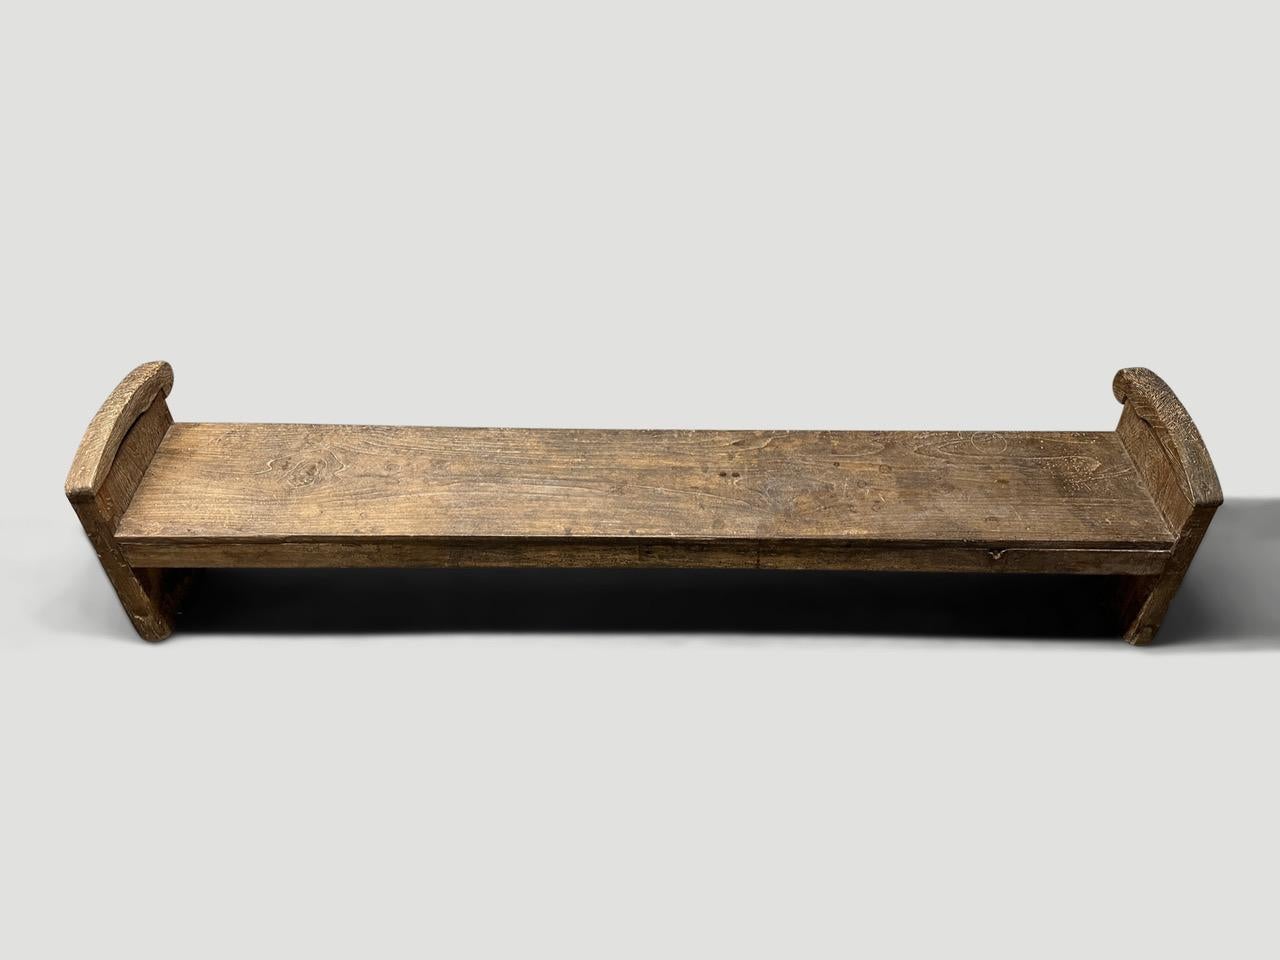 Beautiful patina on this rare antique bench from Madura. Circa 1940. The seat section slopes. Full dimensions; 77” wide x 14” deep x 10.5” seat at the front  x 12.5” seat at the back x 17” arm at highest point.

This bench was hand made in the